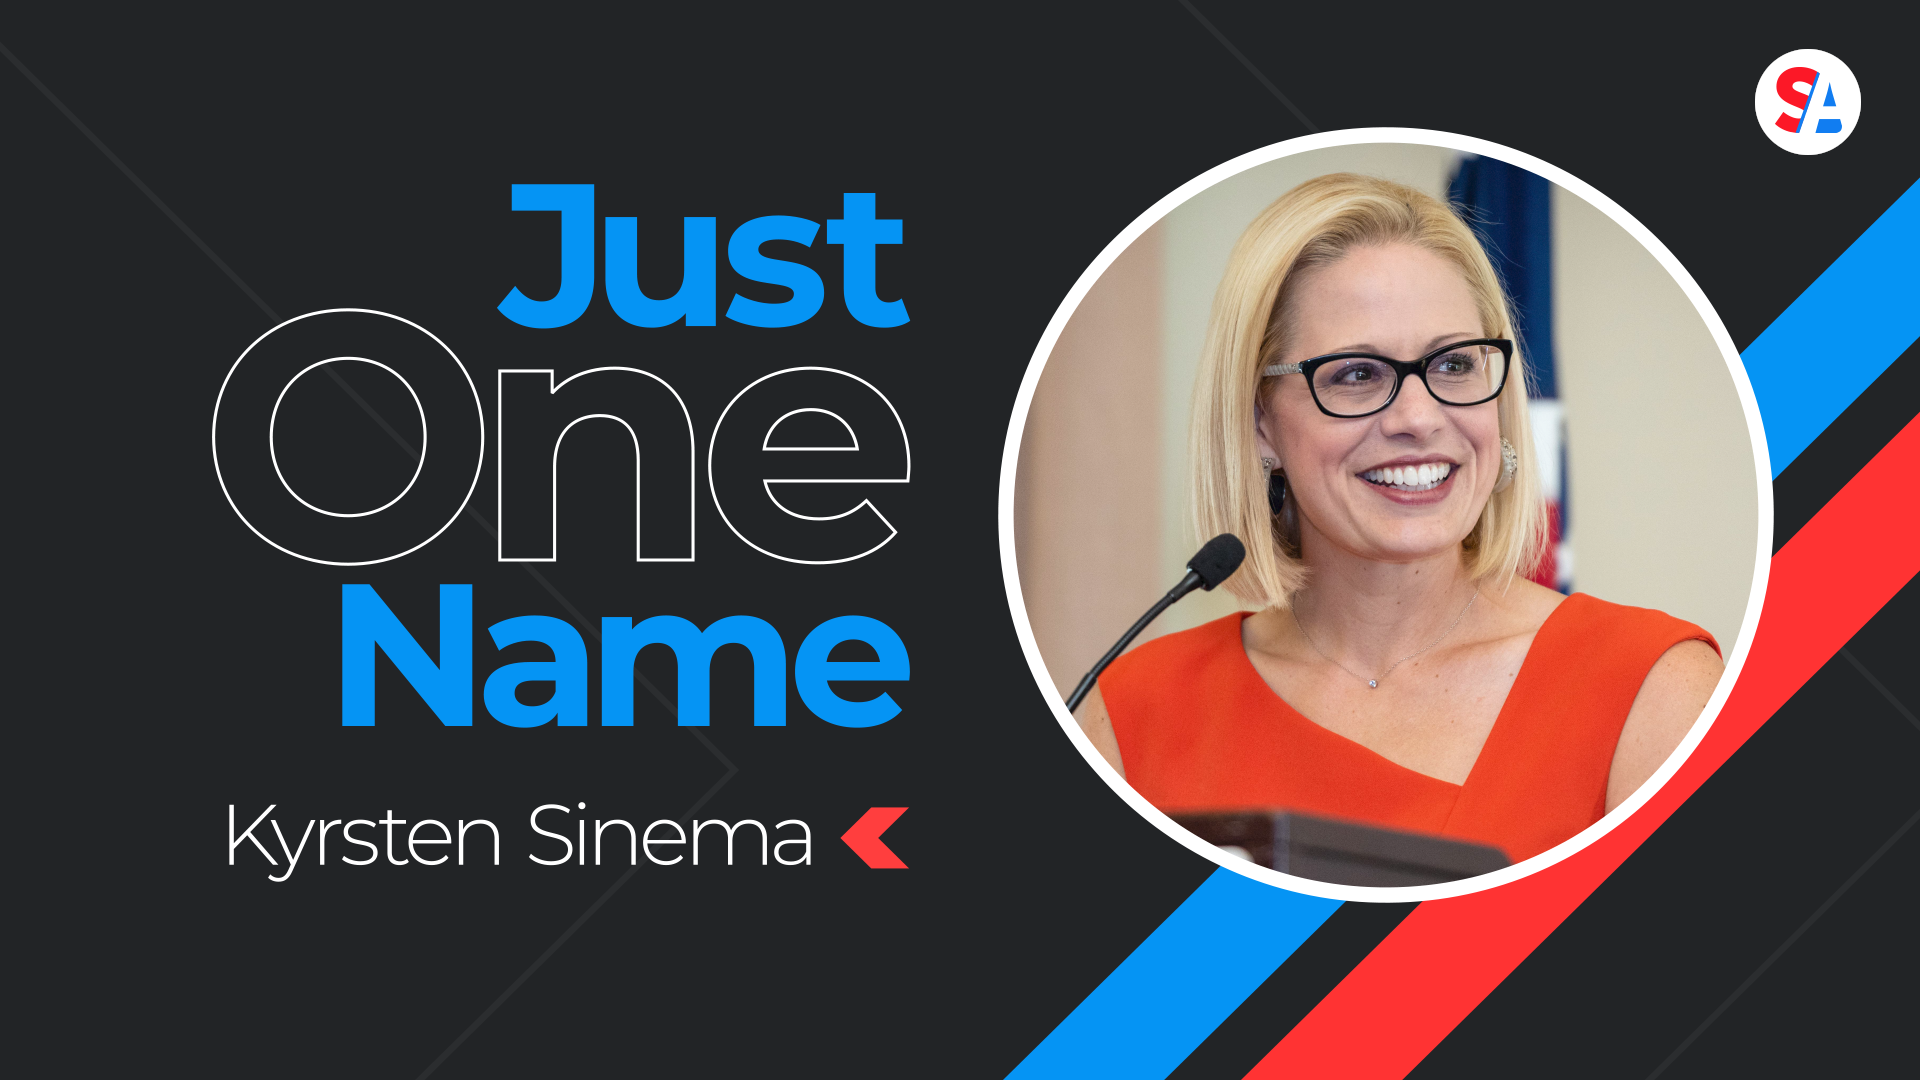 After being hailed as the progressive savior for a conservative state, Arizona Senator Kyrsten Sinema now finds herself at odds with many who voted for her.